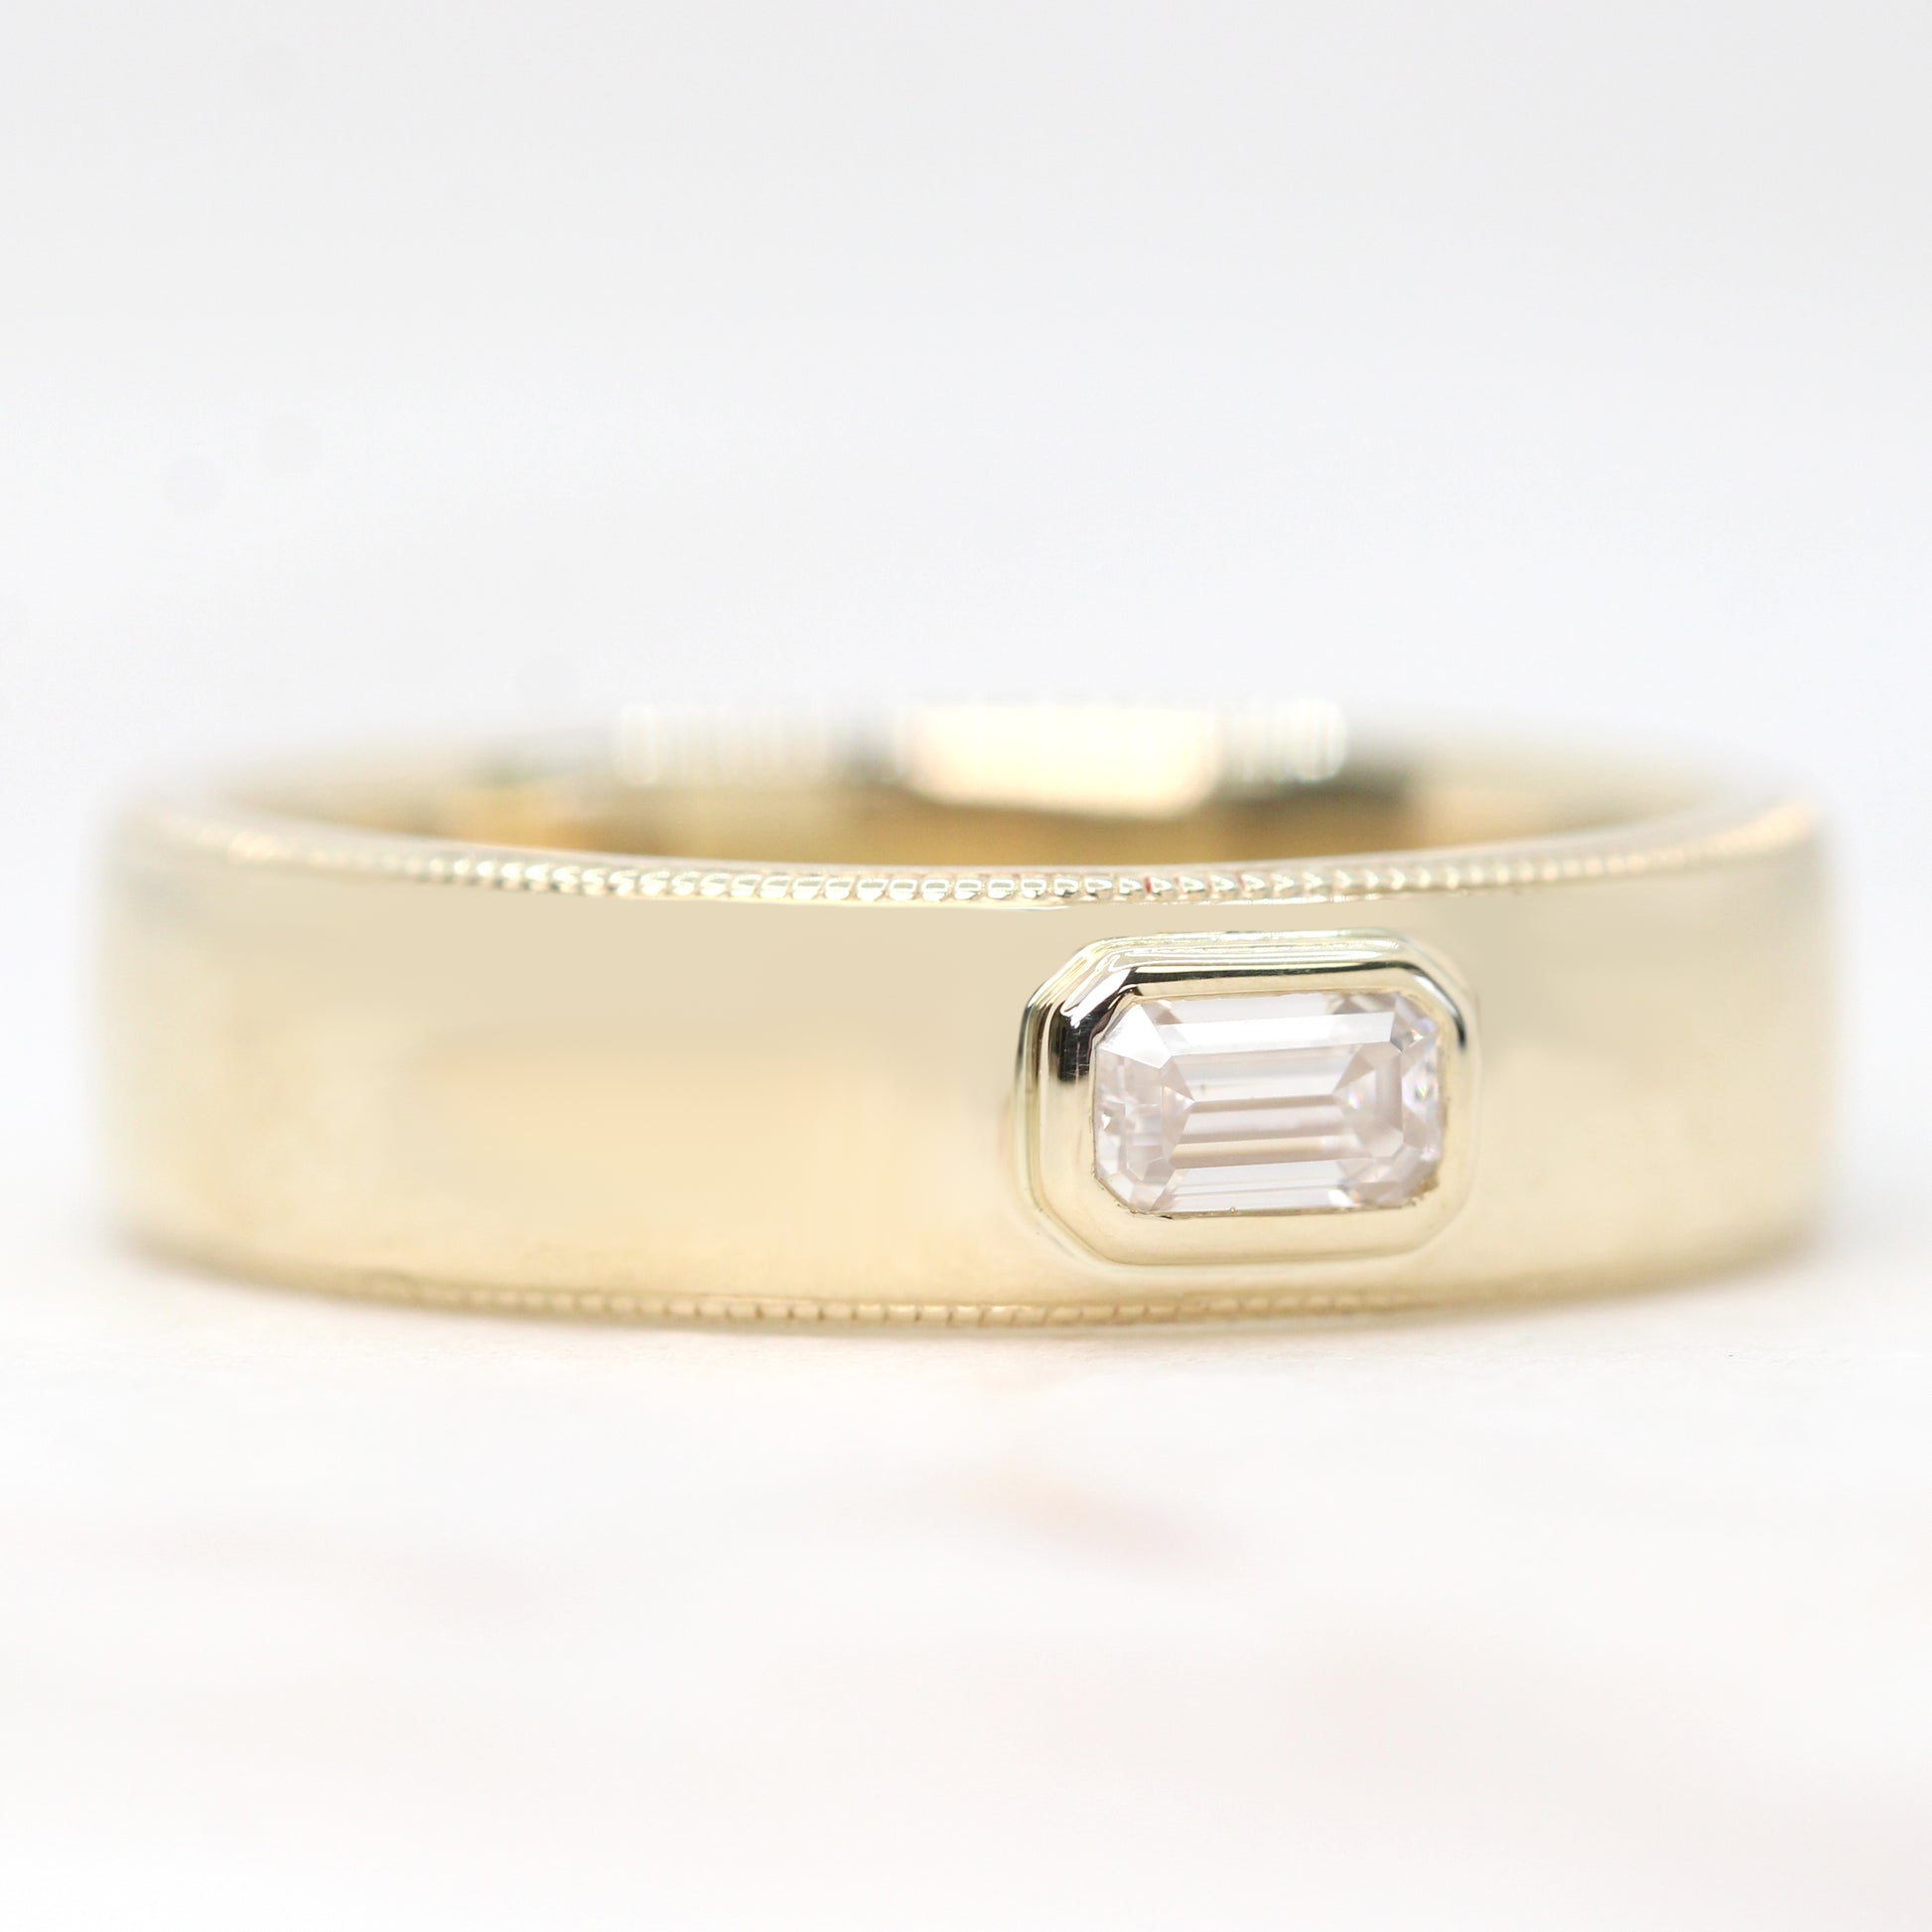 Samantha - Erik Band - Unisex Wedding Band - Made to Order, Choose Your Gold Tone - Midwinter Co. Alternative Bridal Rings and Modern Fine Jewelry